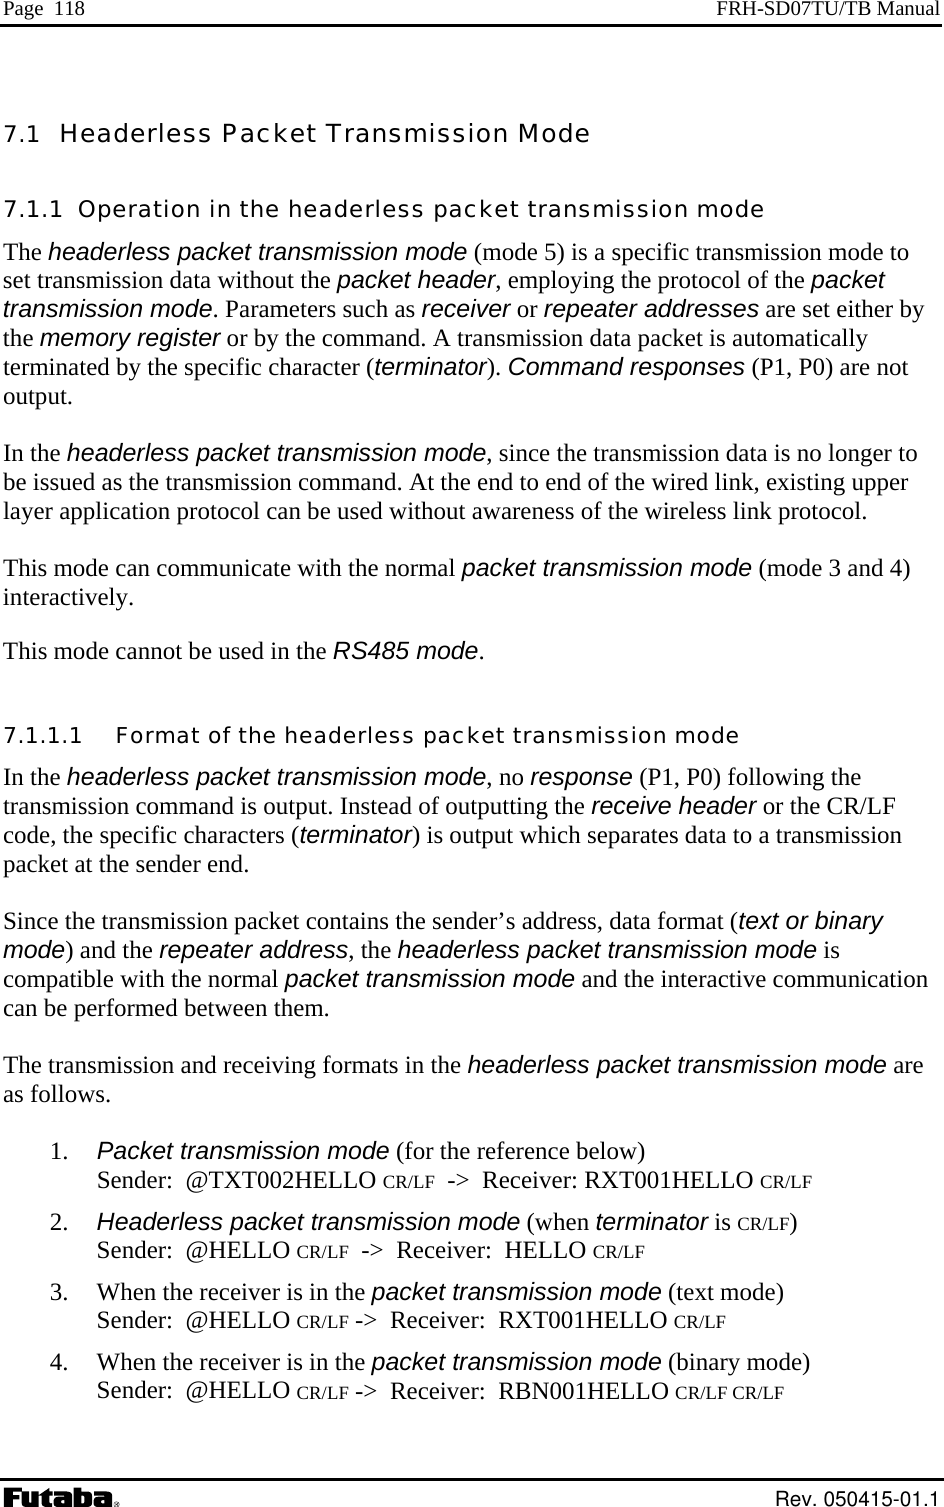 Page  118  FRH-SD07TU/TB Manual 7.1  Headerless Packet Transmission Mode  7.1.1  Operation in the headerless packet transmission mode The headerless packet transmission mode (mode 5) is a specific transmission mode to set transmission data without the packet header, employing the protocol of the packet transmission mode. Parameters such as receiver or repeater addresses are set either by the memory register or by the command. A transmission data packet is automatically terminated by the specific character (terminator). Command responses (P1, P0) are not output.  In the headerless packet transmission mode, since the transmission data is no longer to be issued as the transmission command. At the end to end of the wired link, existing upper layer application protocol can be used without awareness of the wireless link protocol.  This mode can communicate with the normal packet transmission mode (mode 3 and 4) interactively. This mode cannot be used in the RS485 mode. 7.1.1.1   Format of the headerless packet transmission mode In the headerless packet transmission mode, no response (P1, P0) following the transmission command is output. Instead of outputting the receive header or the CR/LF code, the specific characters (terminator) is output which separates data to a transmission packet at the sender end.   Since the transmission packet contains the sender’s address, data format (text or binary mode) and the repeater address, the headerless packet transmission mode is compatible with the normal packet transmission mode and the interactive communication can be performed between them.  The transmission and receiving formats in the headerless packet transmission mode are as follows.  1.   Packet transmission mode (for the reference below) Sender:  @TXT002HELLO CR/LF  -&gt;  Receiver: RXT001HELLO CR/LF 2.   Headerless packet transmission mode (when terminator is CR/LF) Sender:  @HELLO CR/LF  -&gt;  Receiver:  HELLO CR/LF 3.   When the receiver is in the packet transmission mode (text mode) Sender:  @HELLO CR/LF -&gt;  Receiver:  RXT001HELLO CR/LF 4.   When the receiver is in the packet transmission mode (binary mode) Sender:  @HELLO CR/LF -&gt;  Receiver:  RBN001HELLO CR/LF CR/LF  Rev. 050415-01.1 